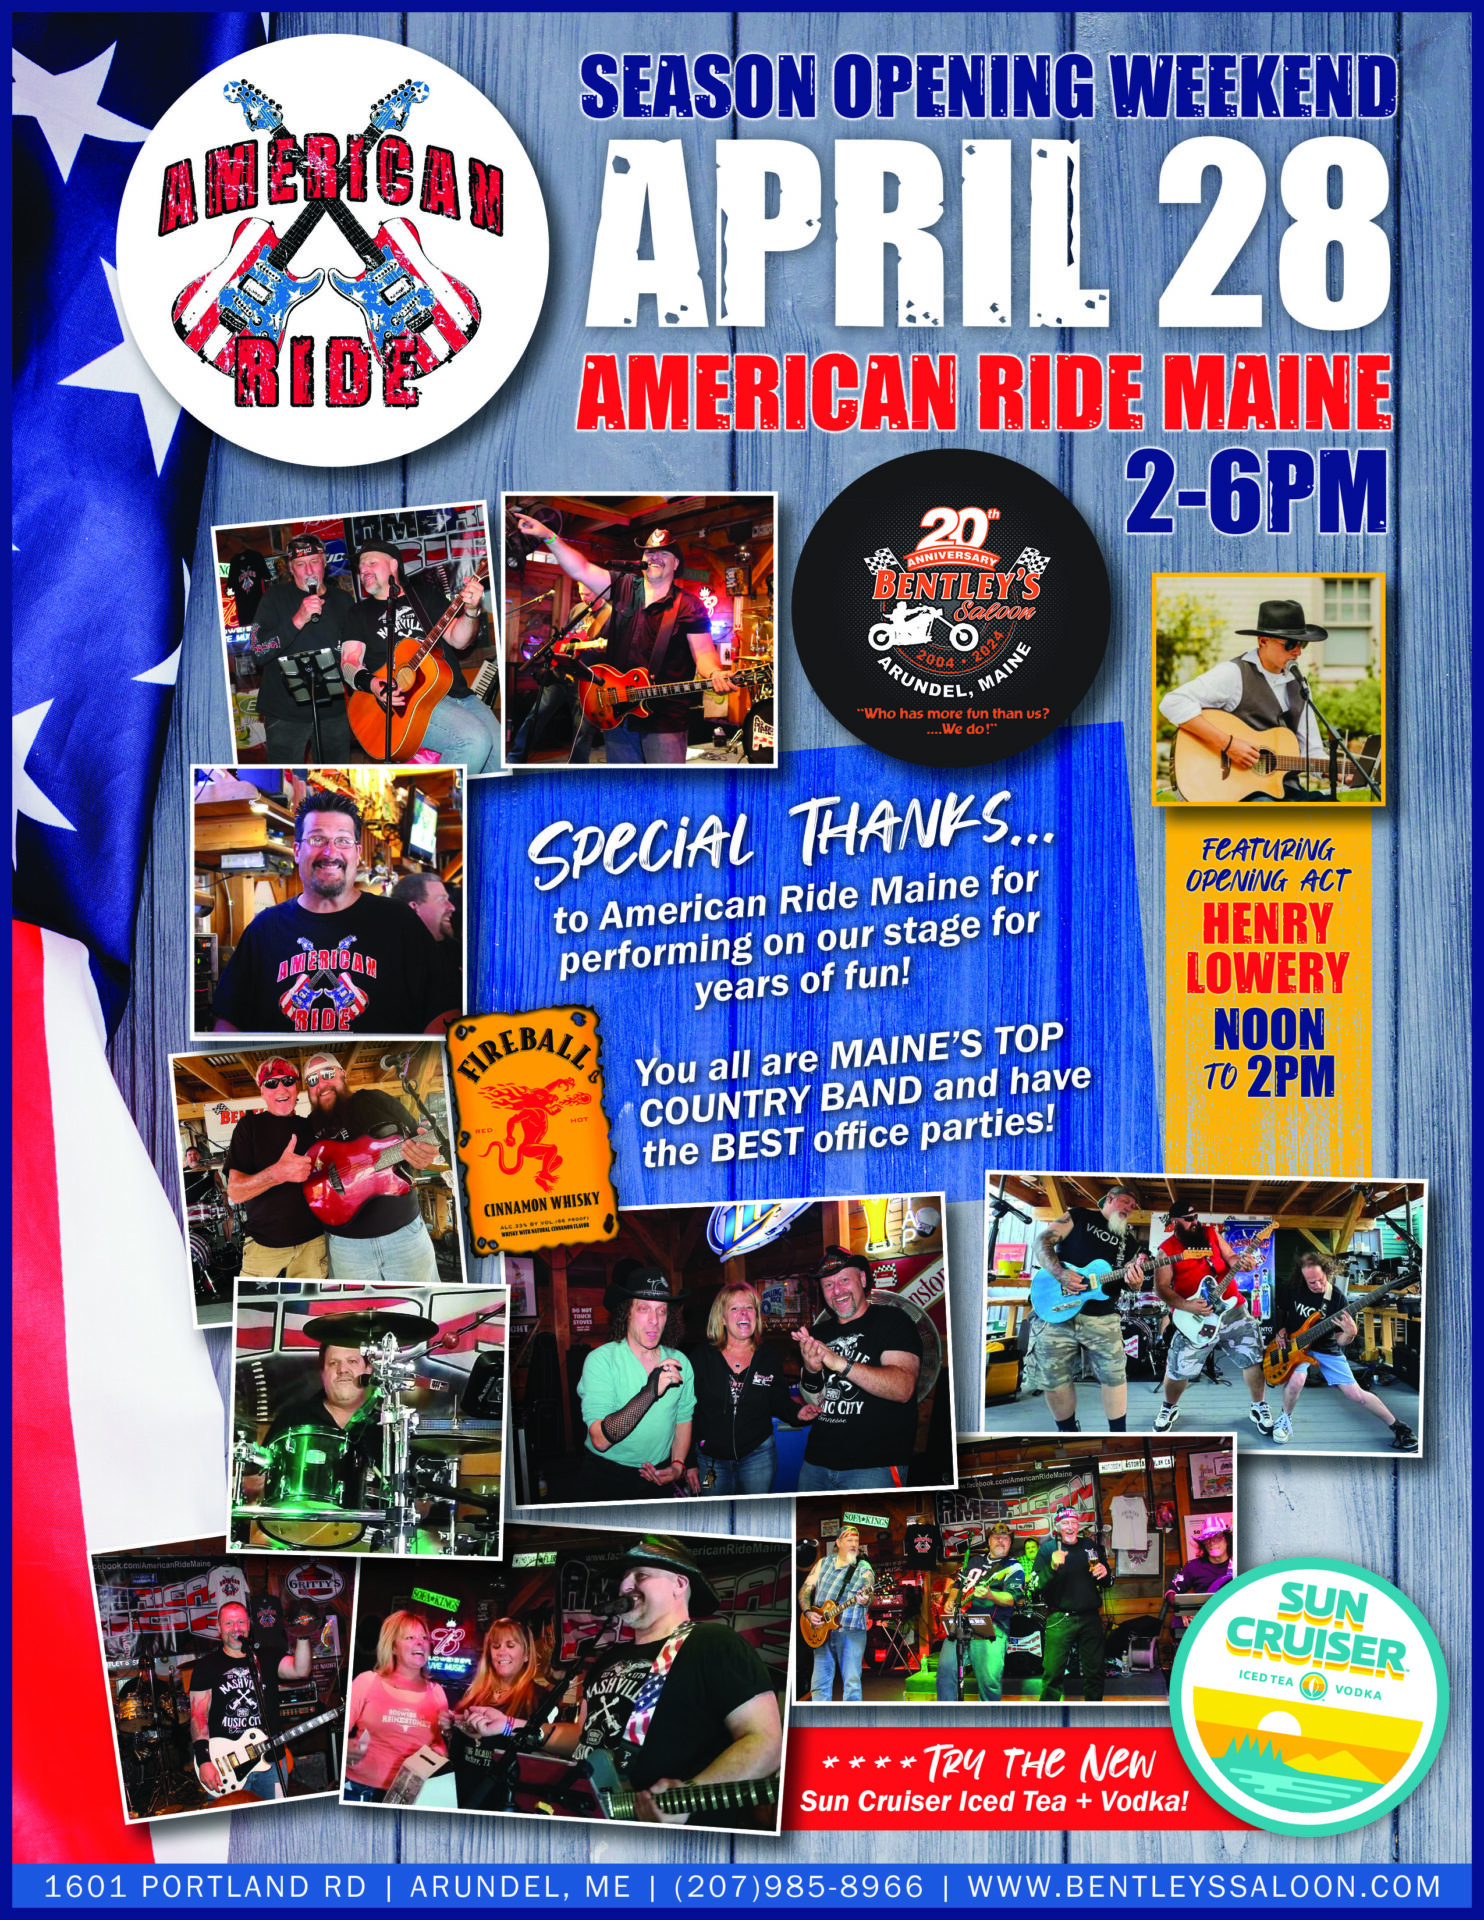 A poster of the american ride maine event.